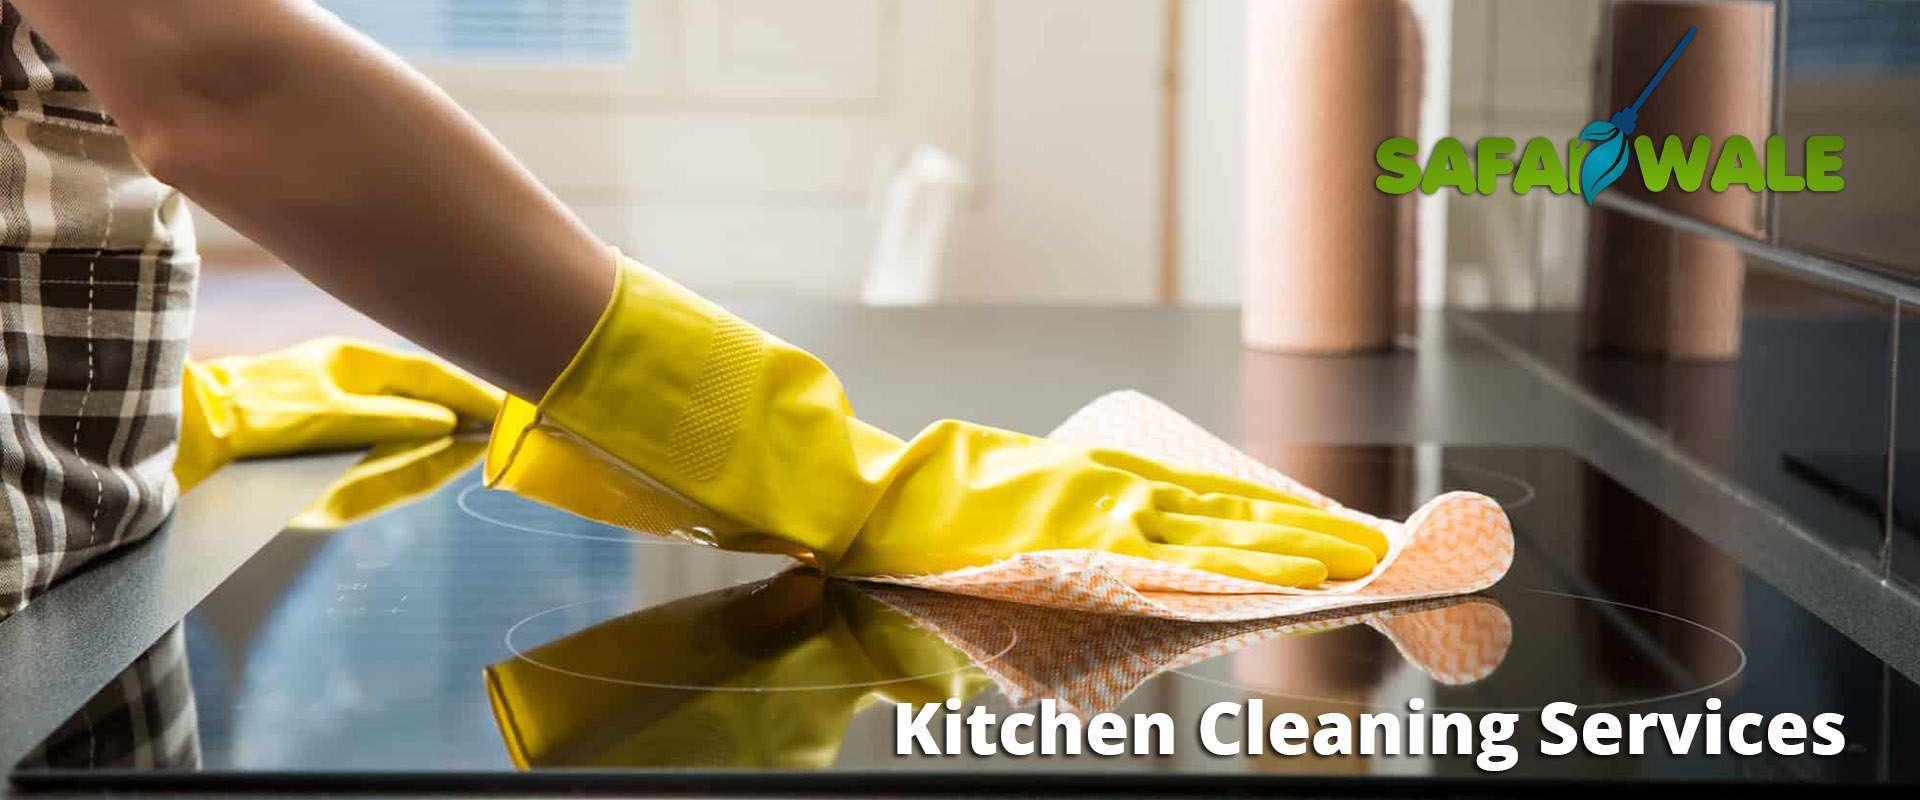 kitchen cleaning services in Chennai